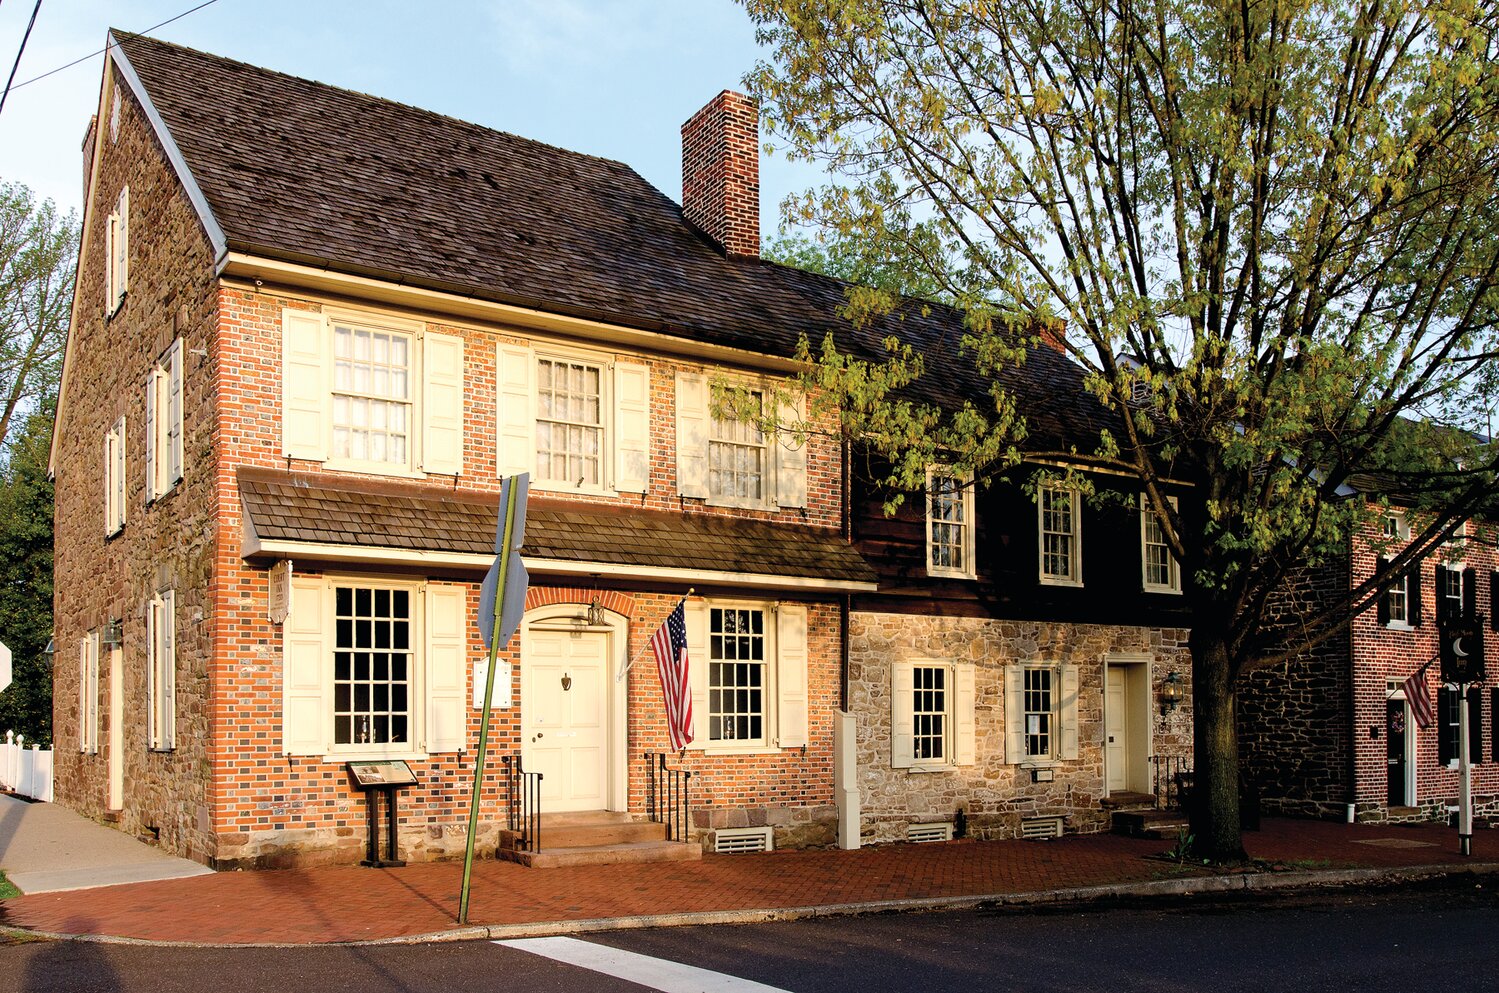 Half-moon Inn (Court Inn) will be the site of the May 18 Spring Garden Cocktail Party, benefiting the Newtown Historic Association.